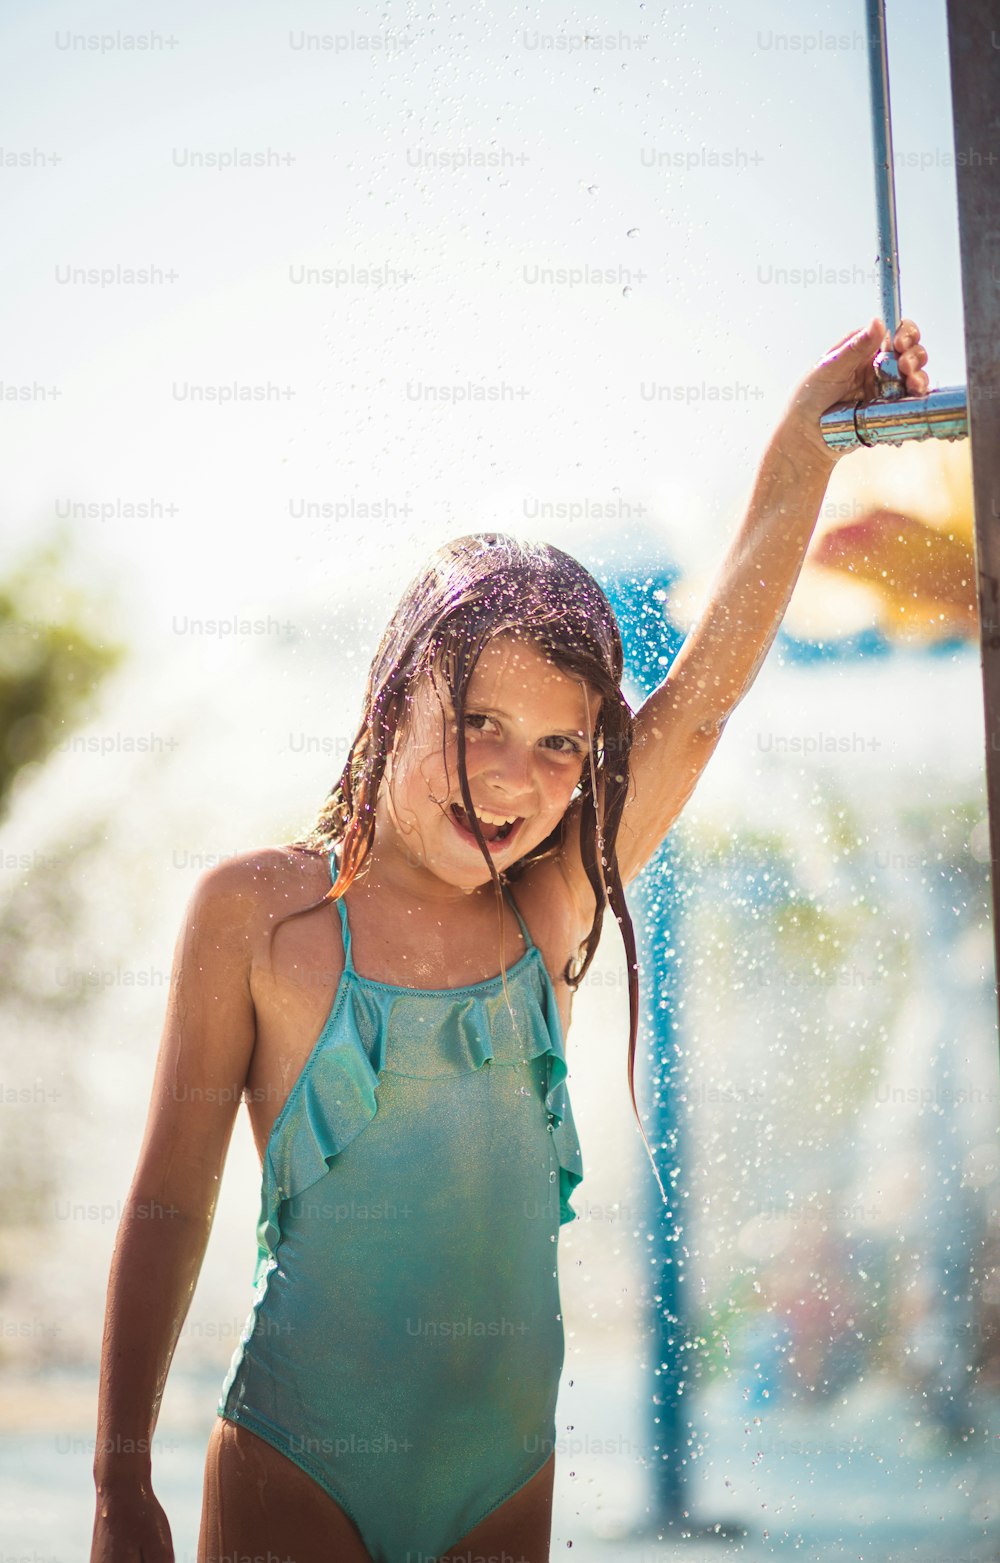 The perfect way to cool off. Child showering after pool.